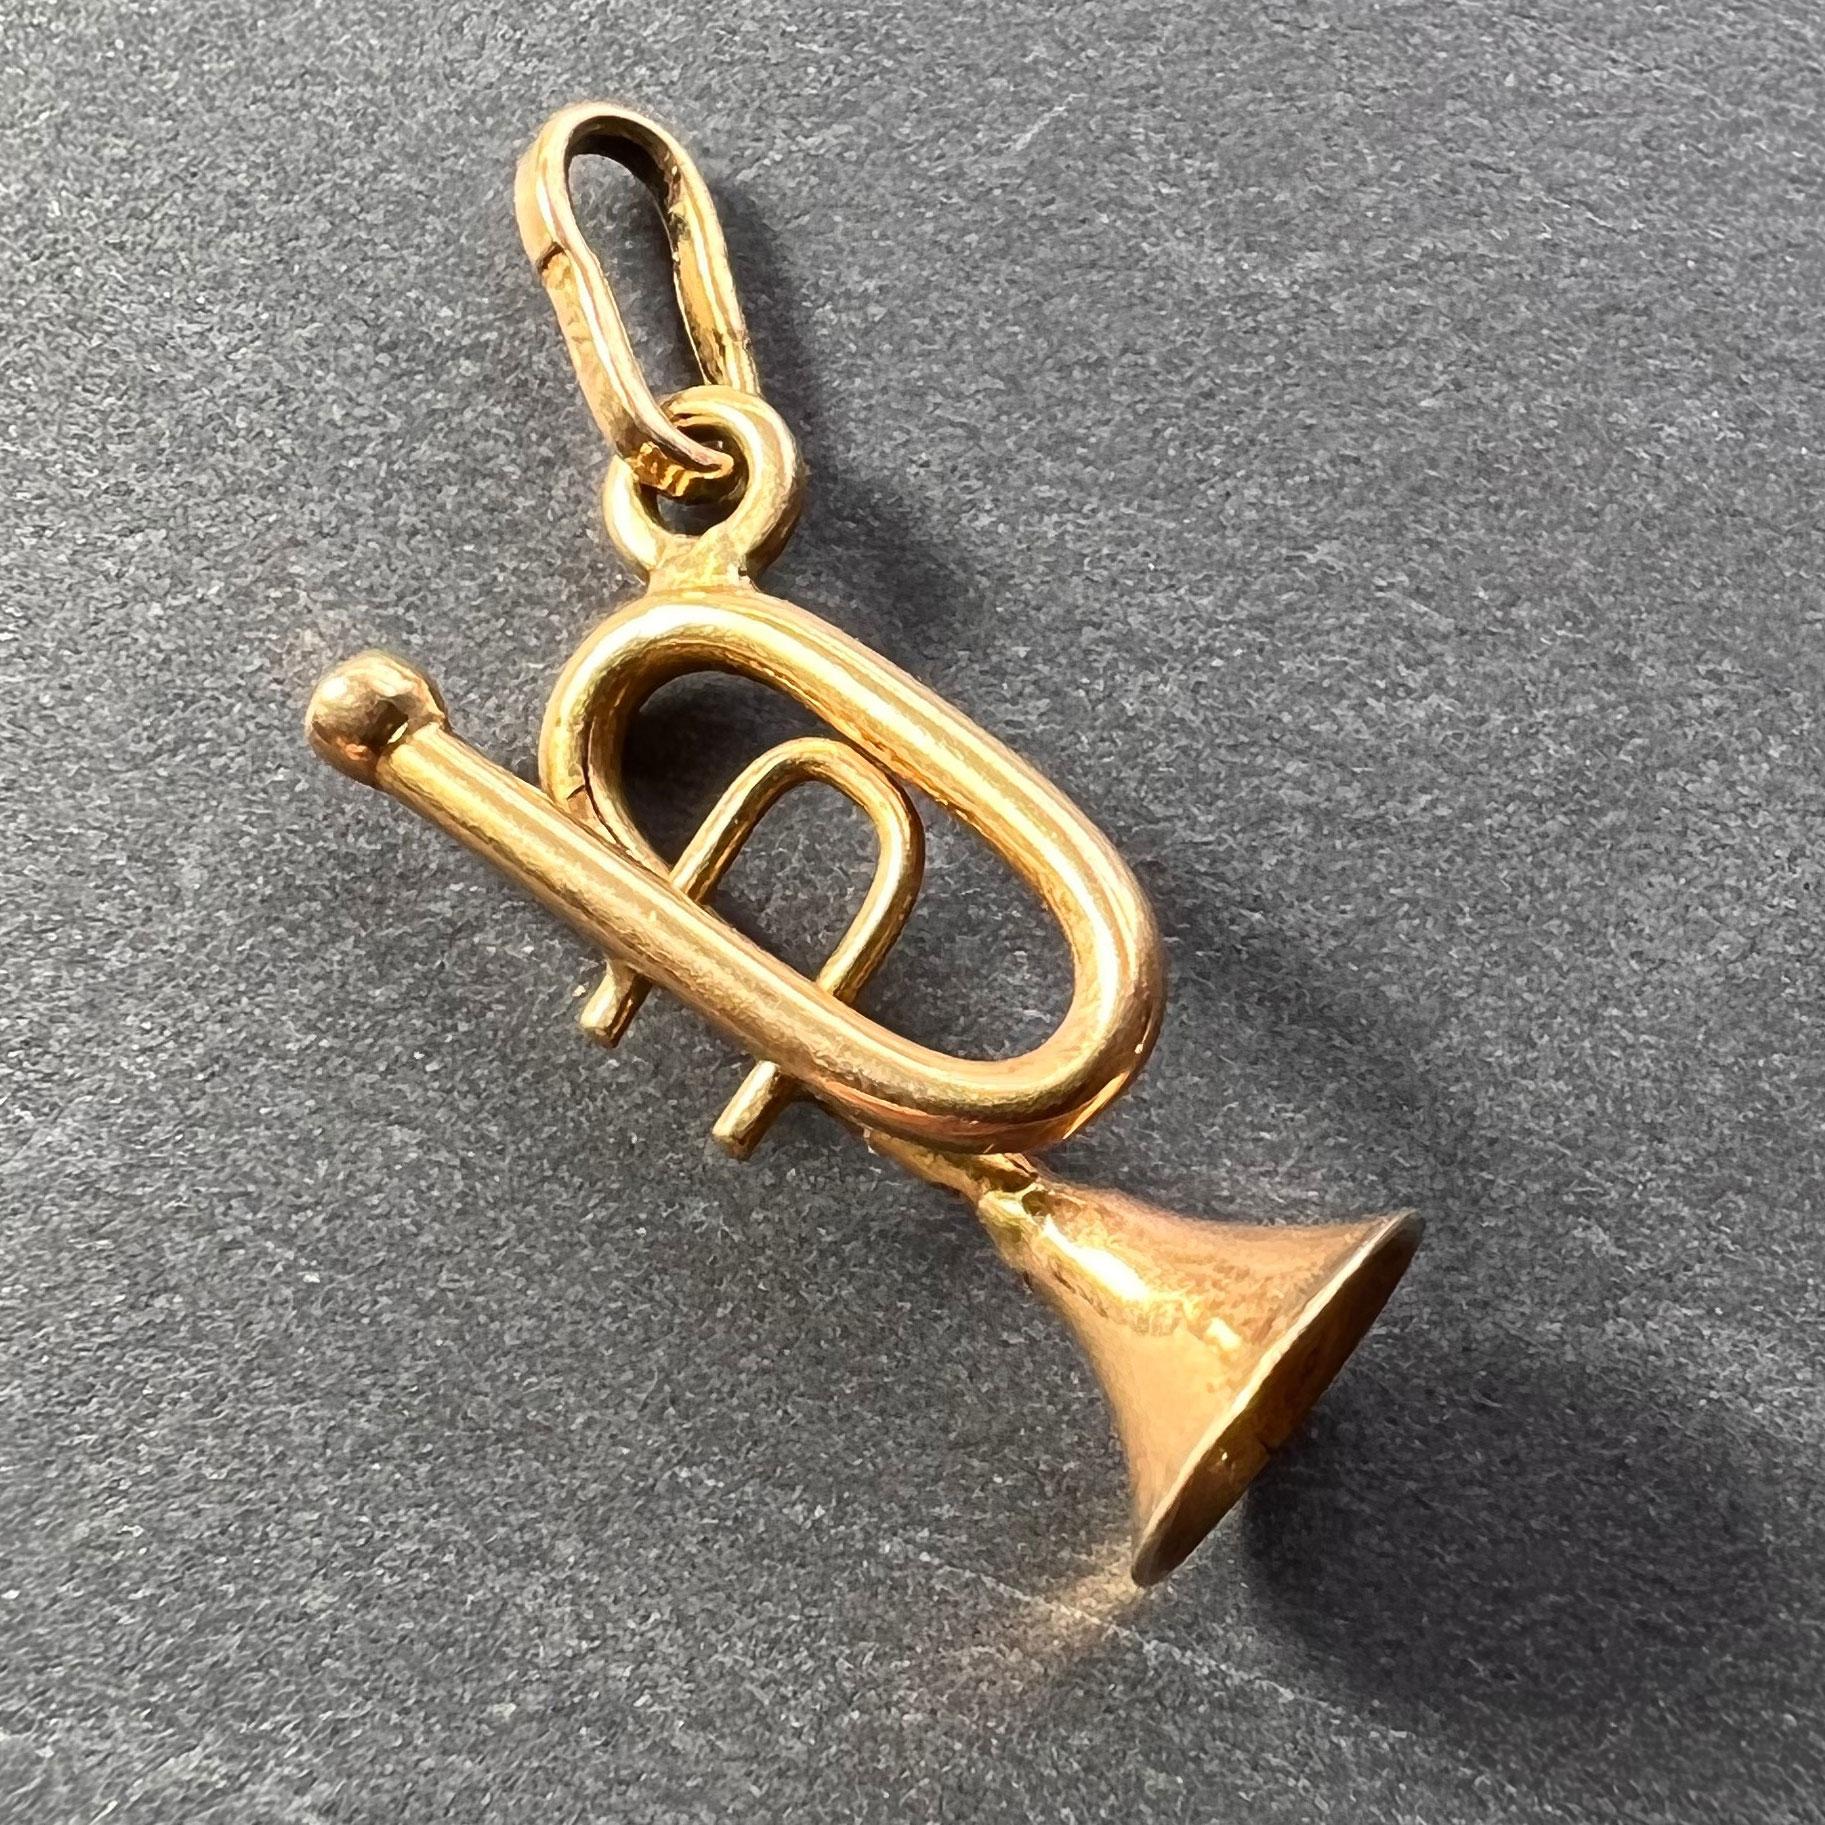 An 18 karat (18K) yellow gold charm pendant designed as a trumpet. Stamped 750 for 18 karat gold to the bail.
 
Dimensions: 1.9 x 1.1 x 0.65 cm (not including jump ring)
Weight: 1.42 grams
